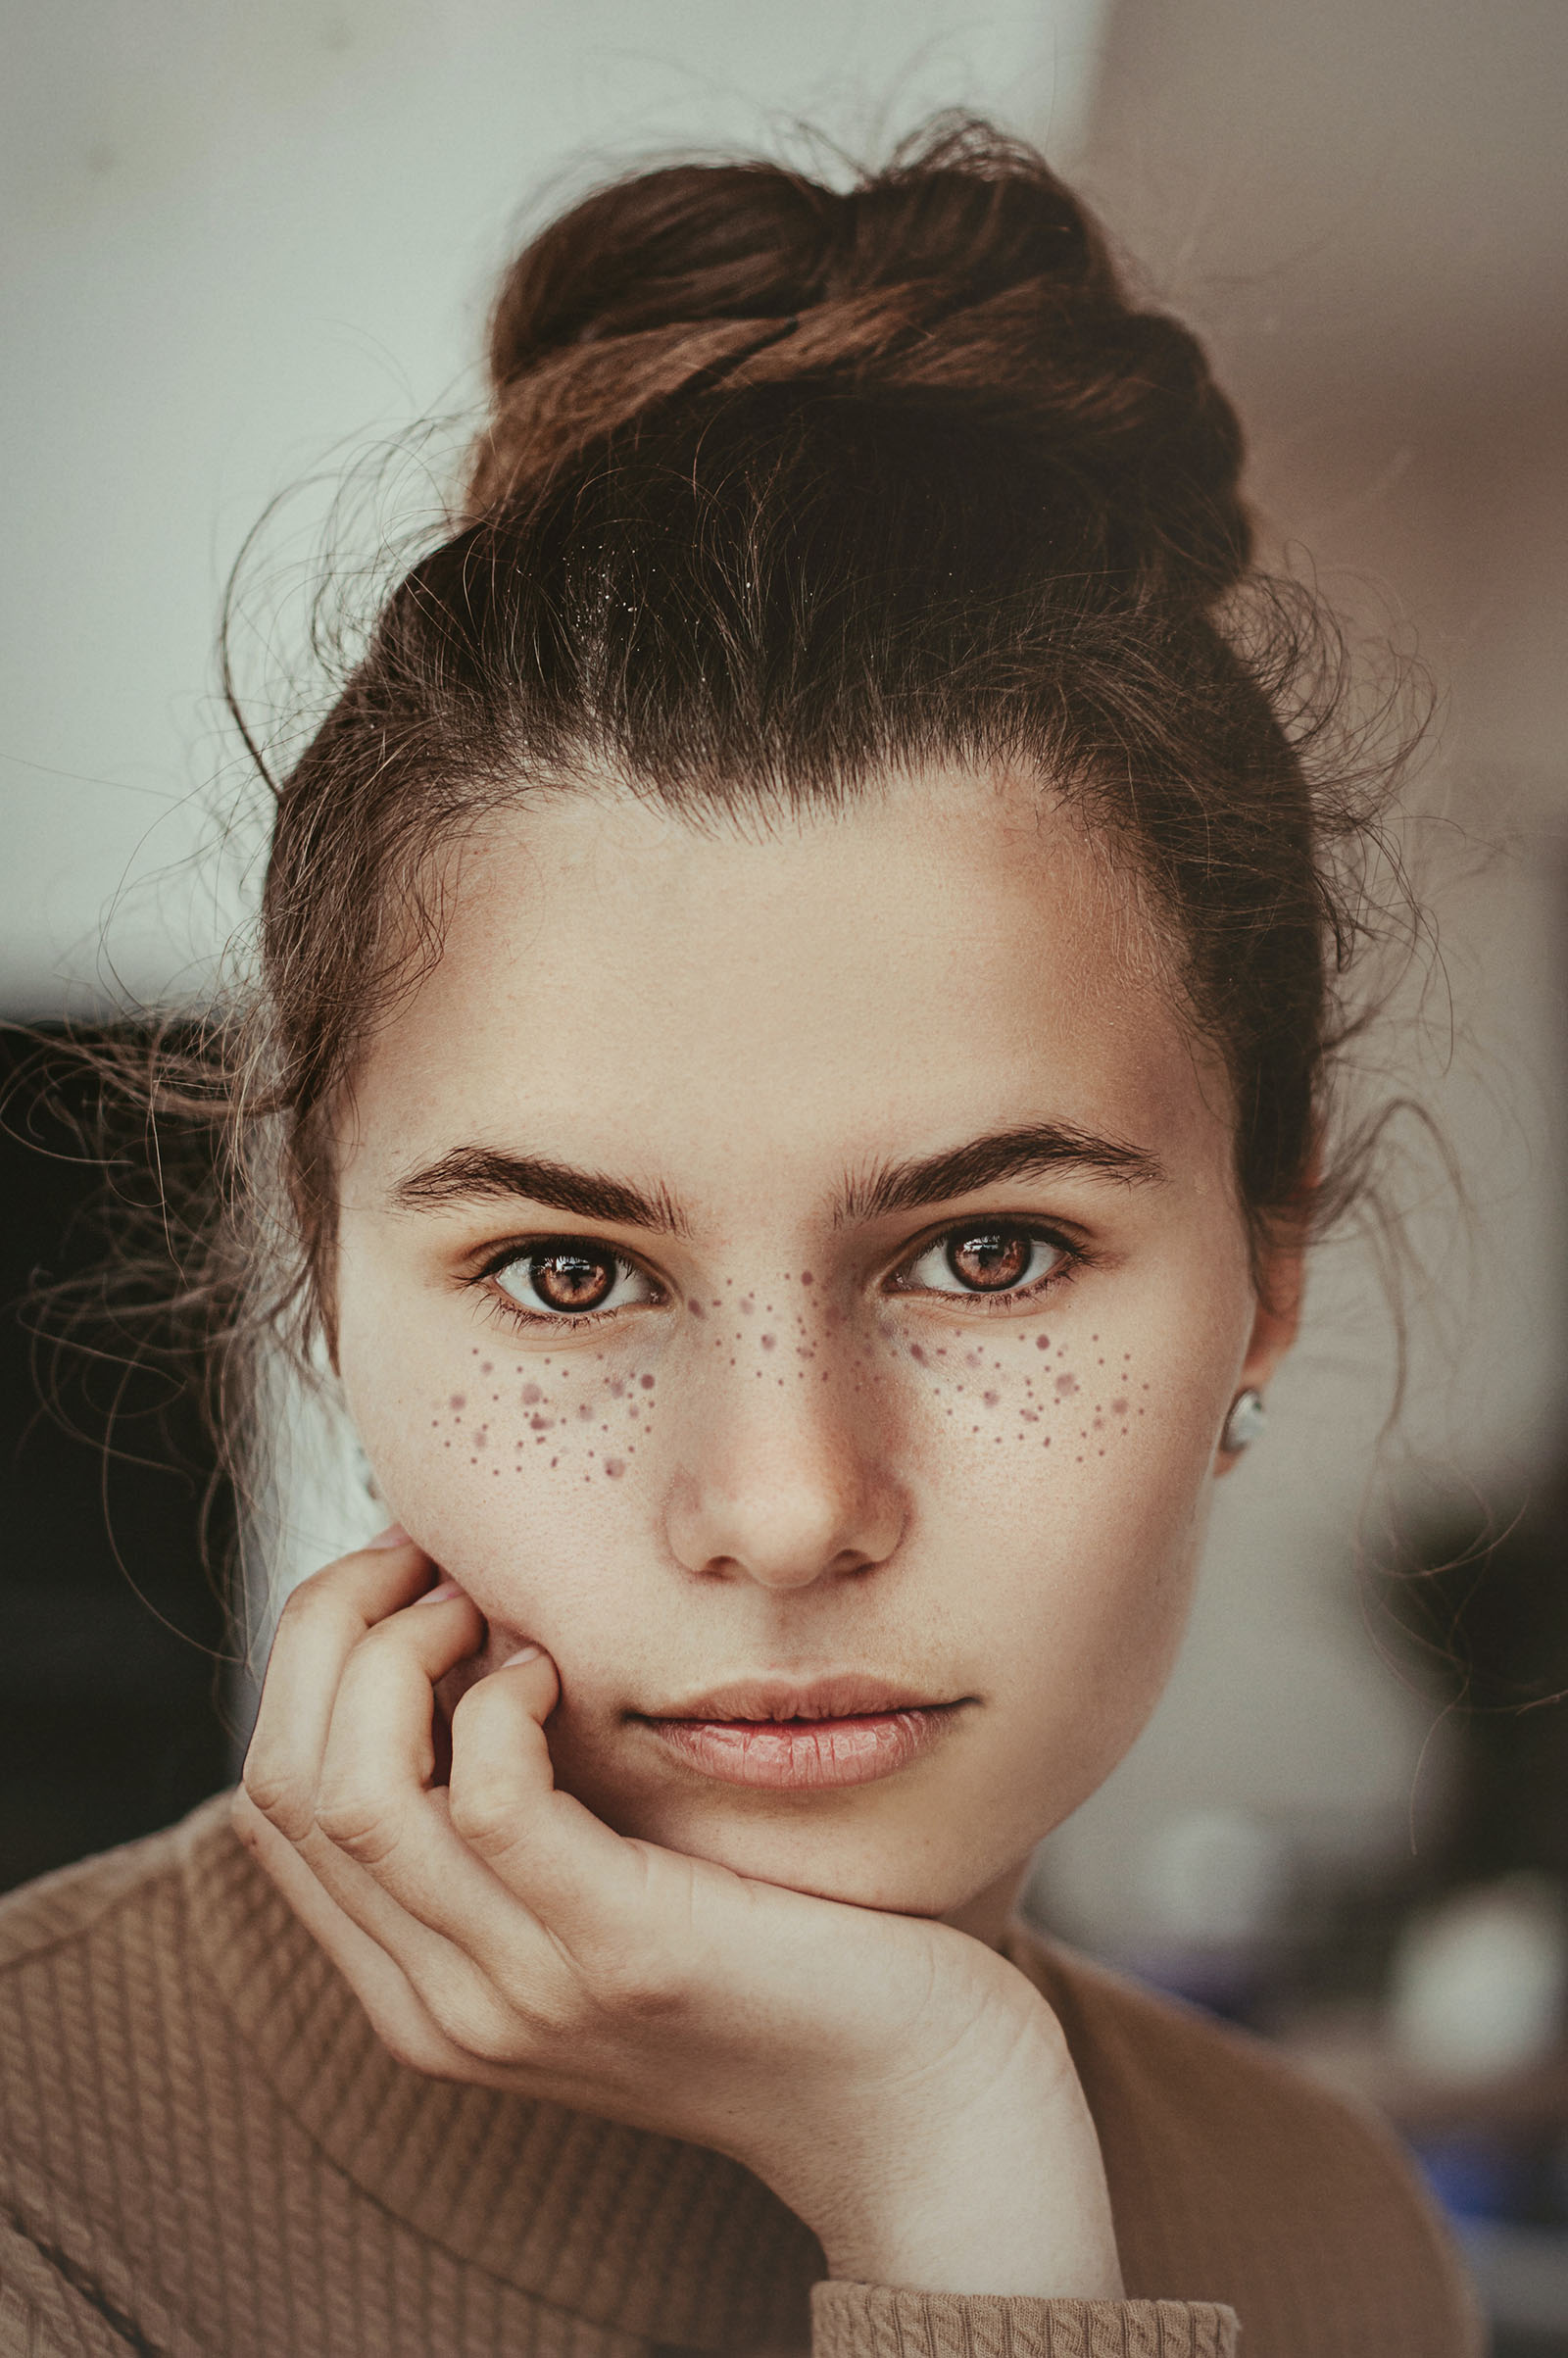 Fake freckles were one of the worst beauty trends in 2023